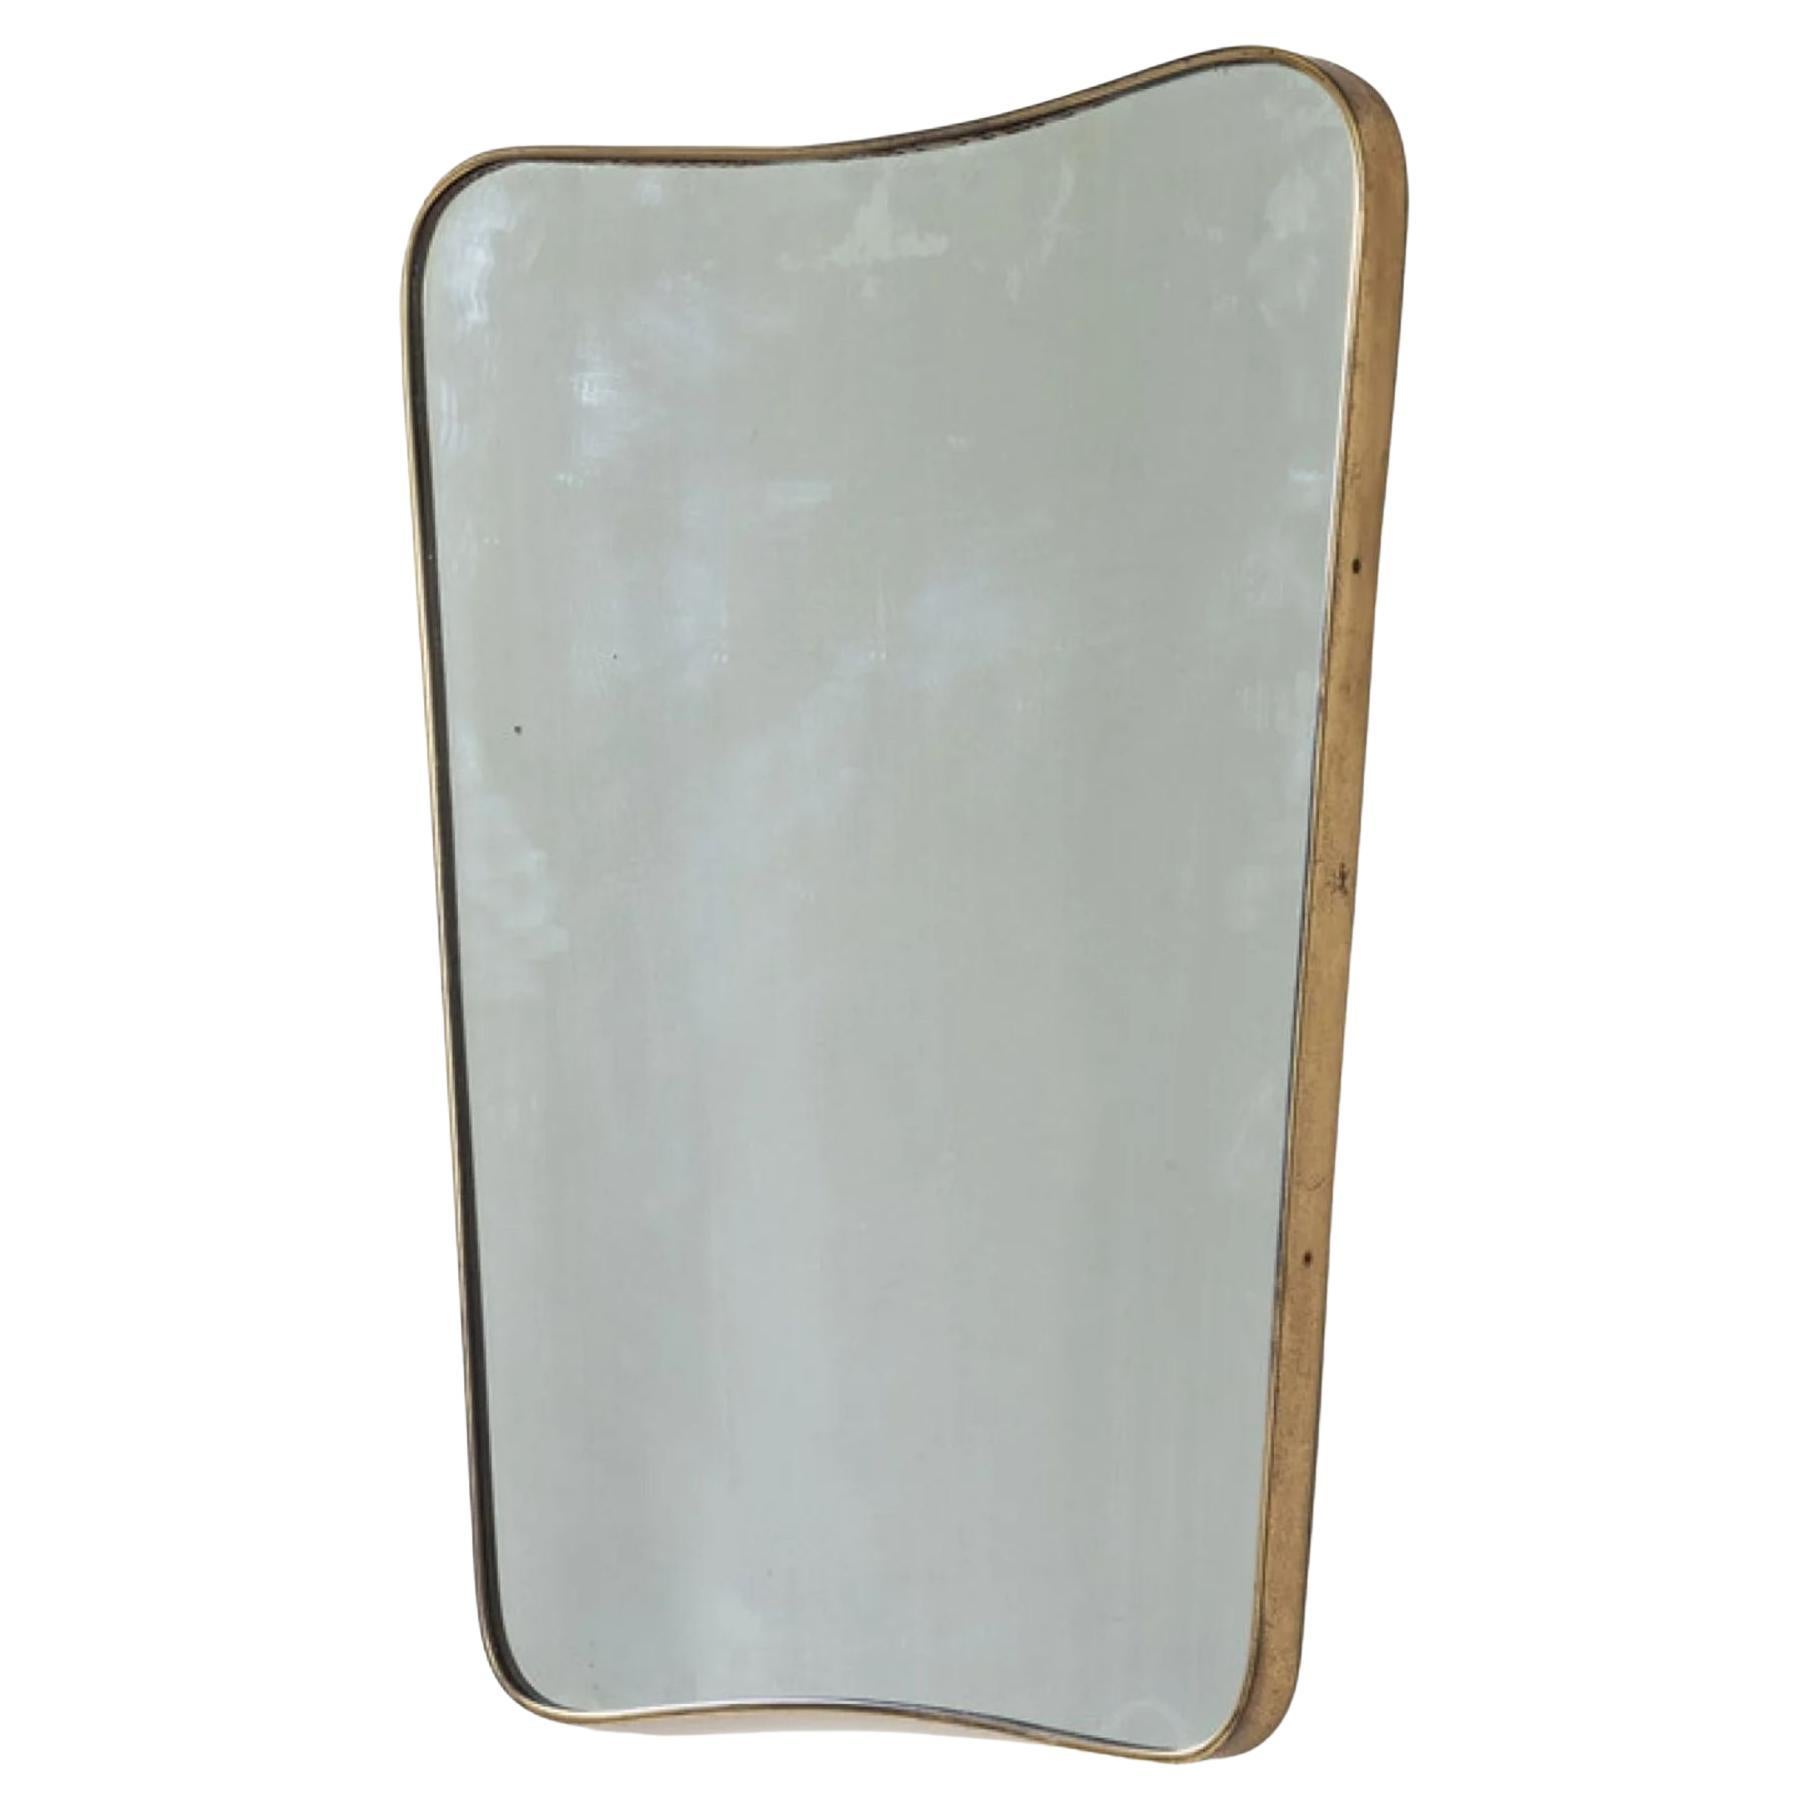 Italian brass framed mirror Designed by Gio Ponti for Fontana Arte, 1950s

A 1950s production of the F.A.33 mirror designed by Gio Ponti for Fontana Arte in 1933.

Dimensions: 78 x 60 cm.